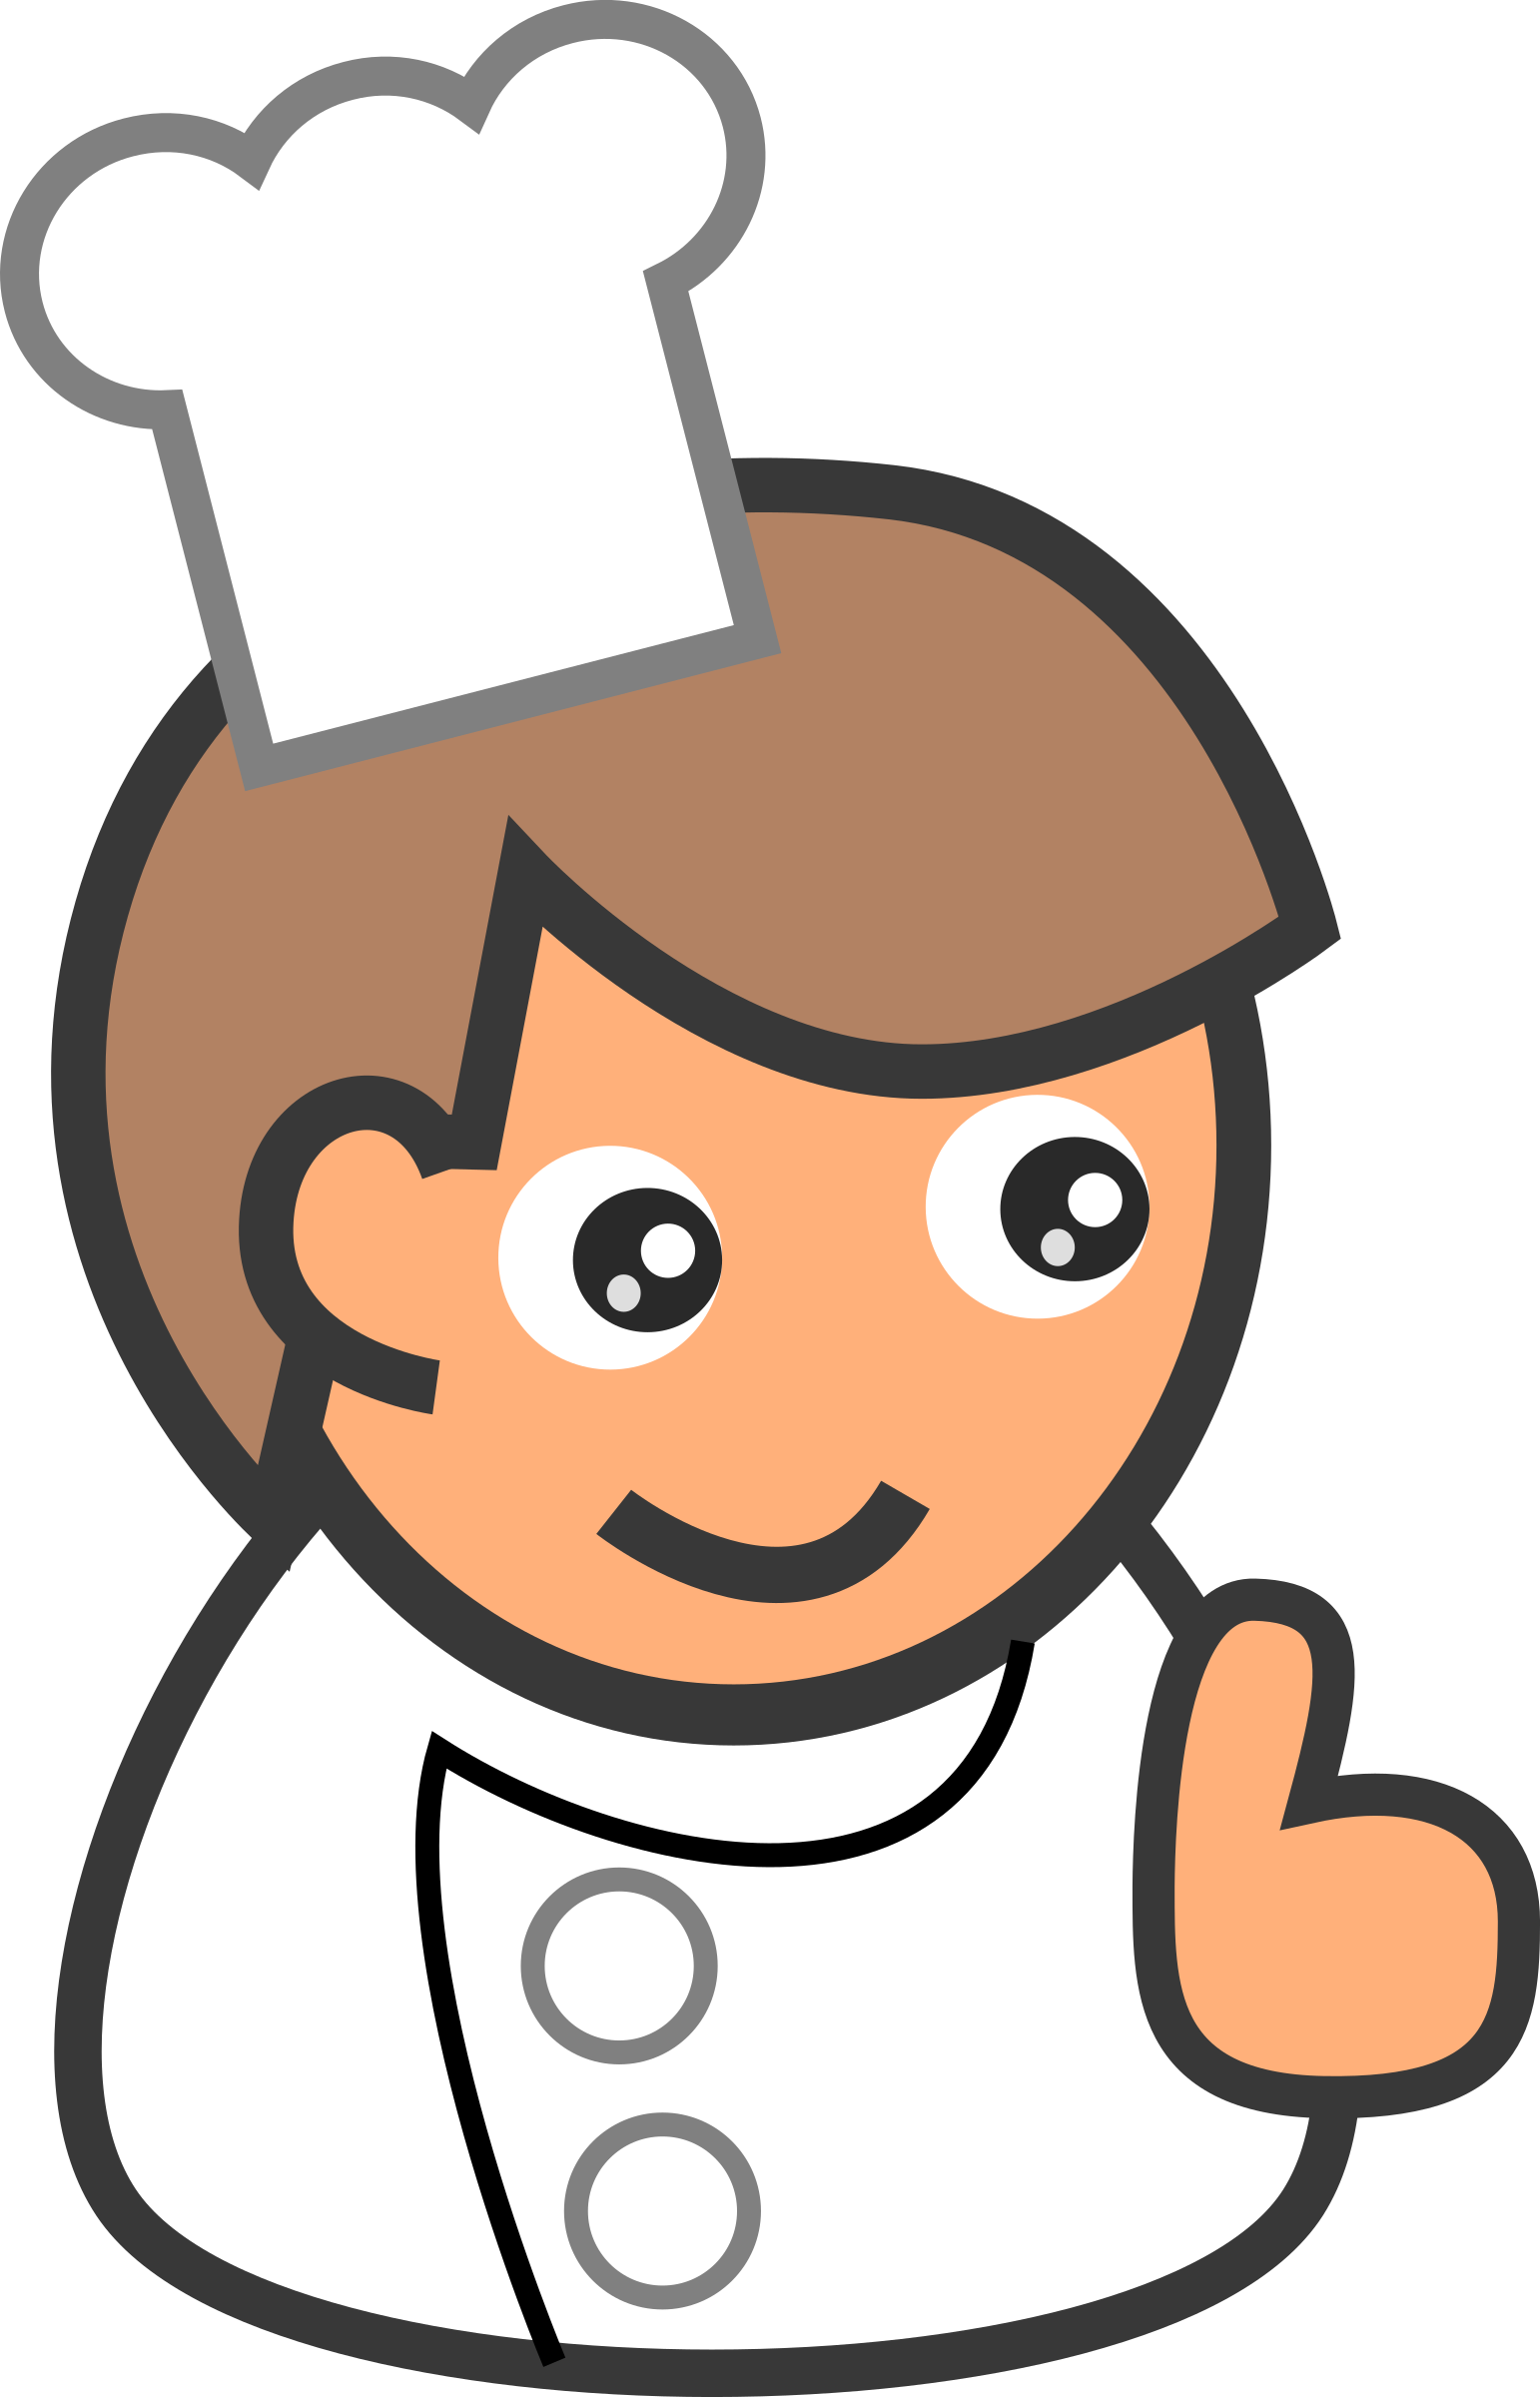 Big Image - Cook Icon Png (1542x2400)